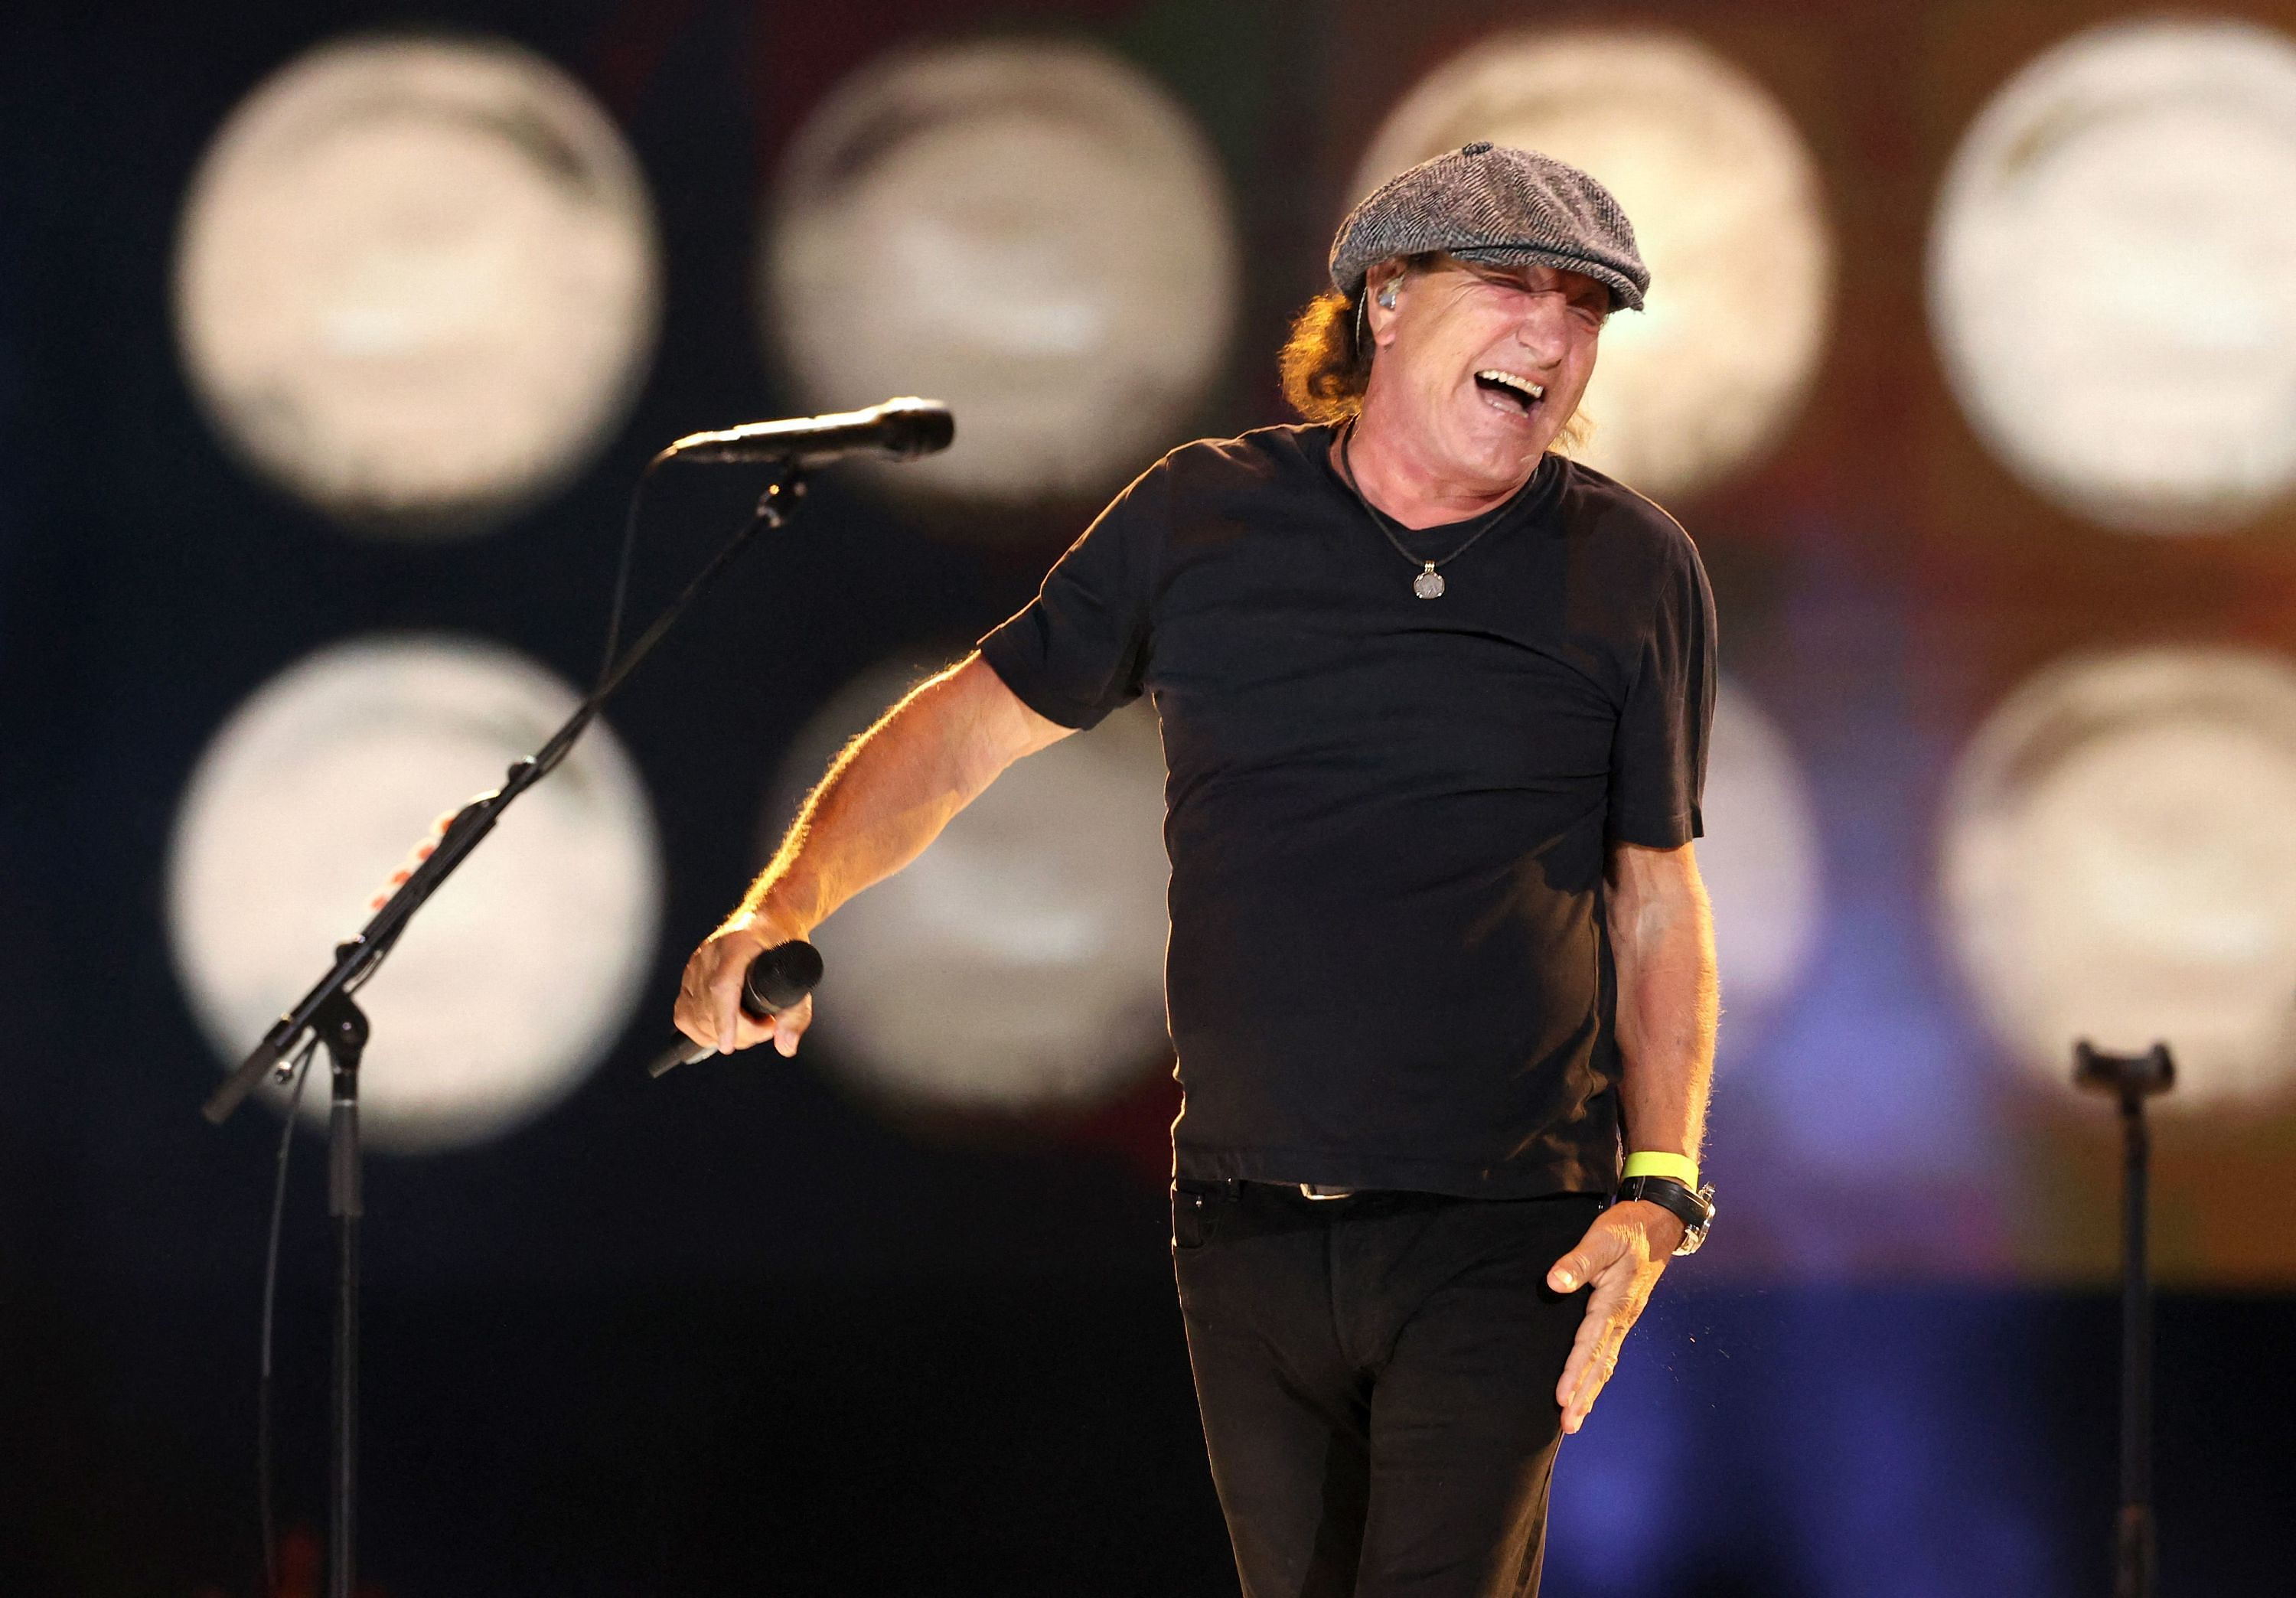 The AC/DC group returns to Europe after eight years of absence